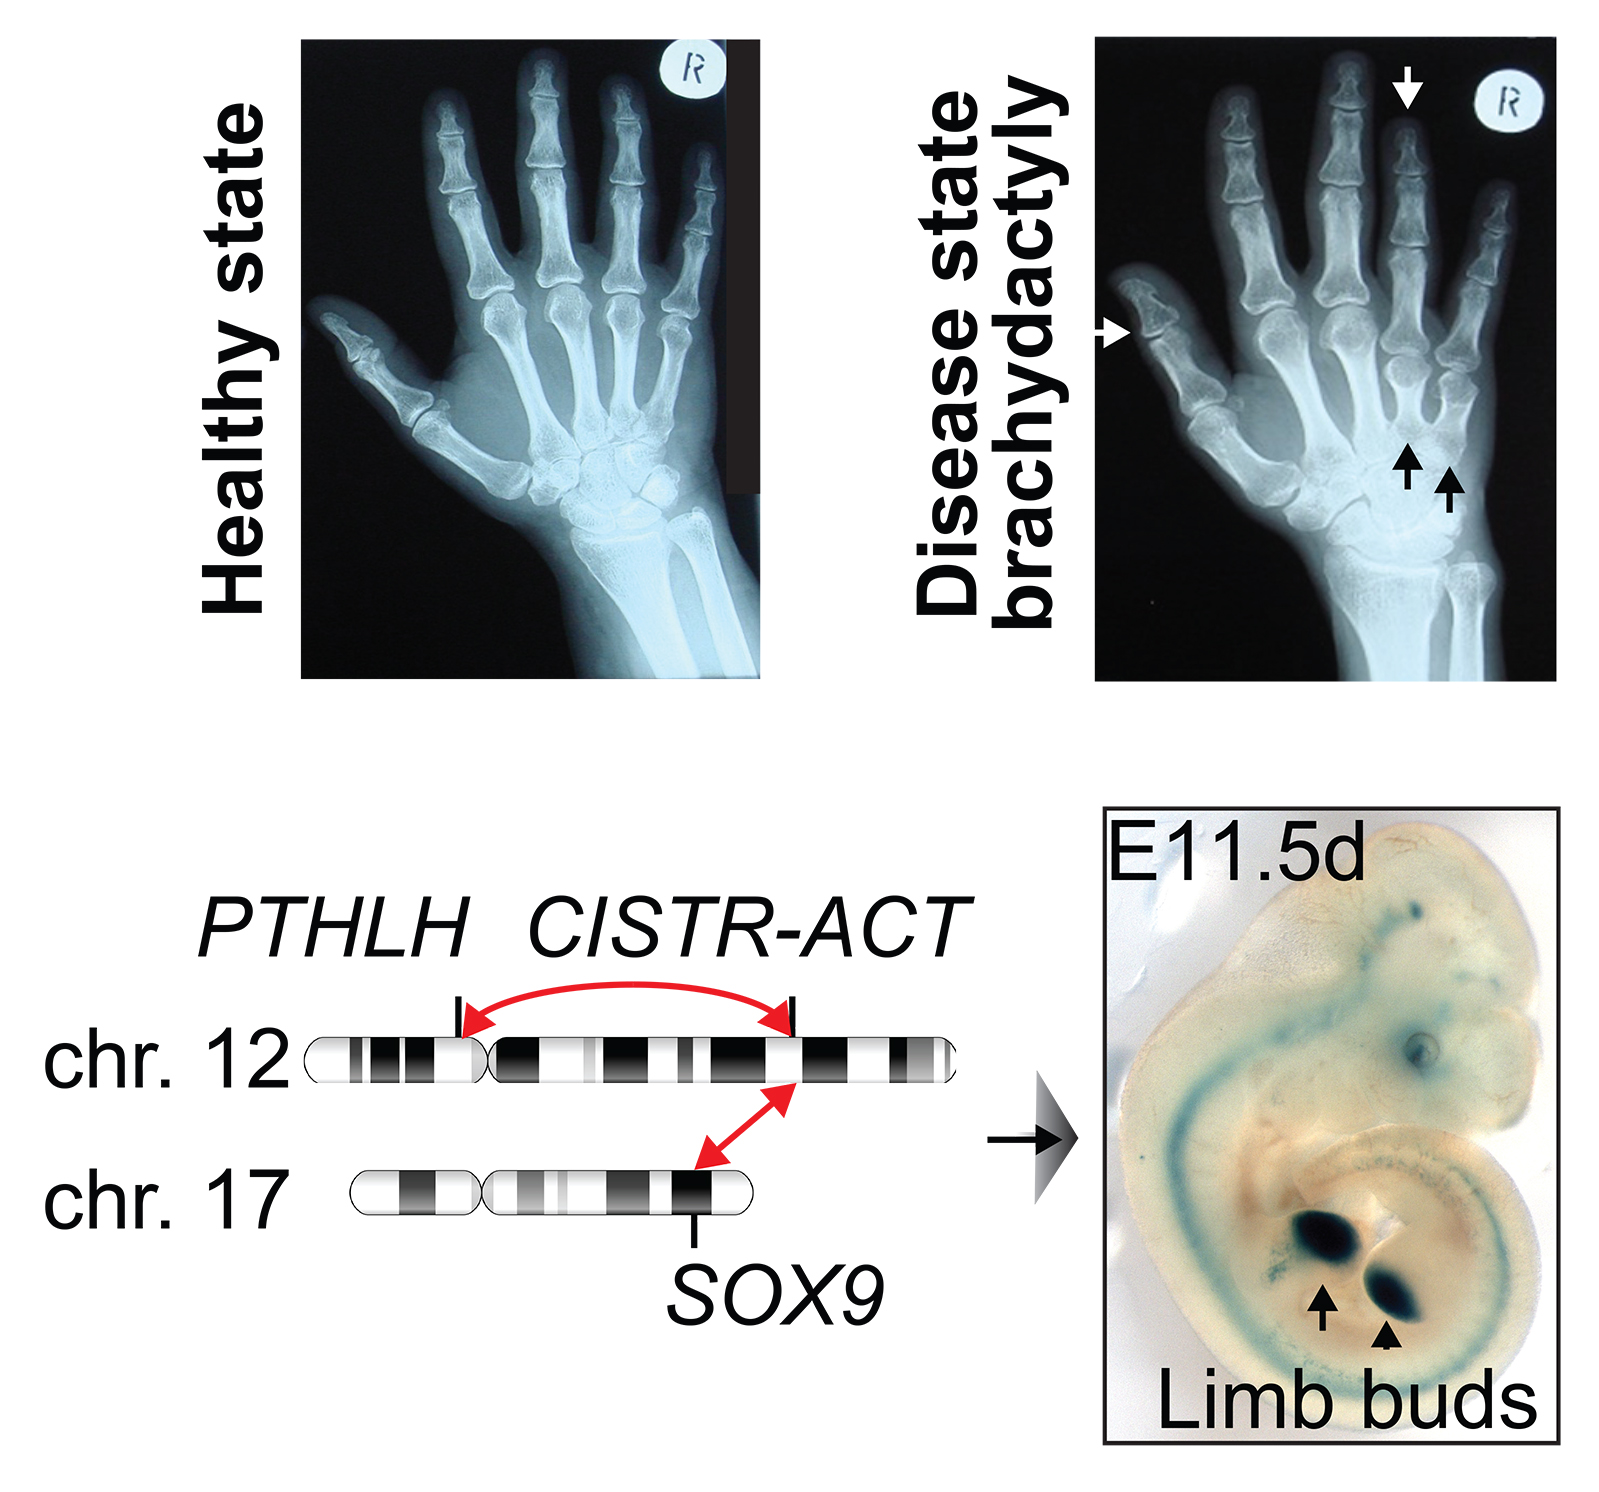 Hand roentgenograms show shortened fingers (brachydactyly), caused by misplaced inter-chromosomal interactions between the long non-coding RNA gene locus CISTR-ACT (chromosome 12) and the transcription factor SOX9 (chromosome 17).